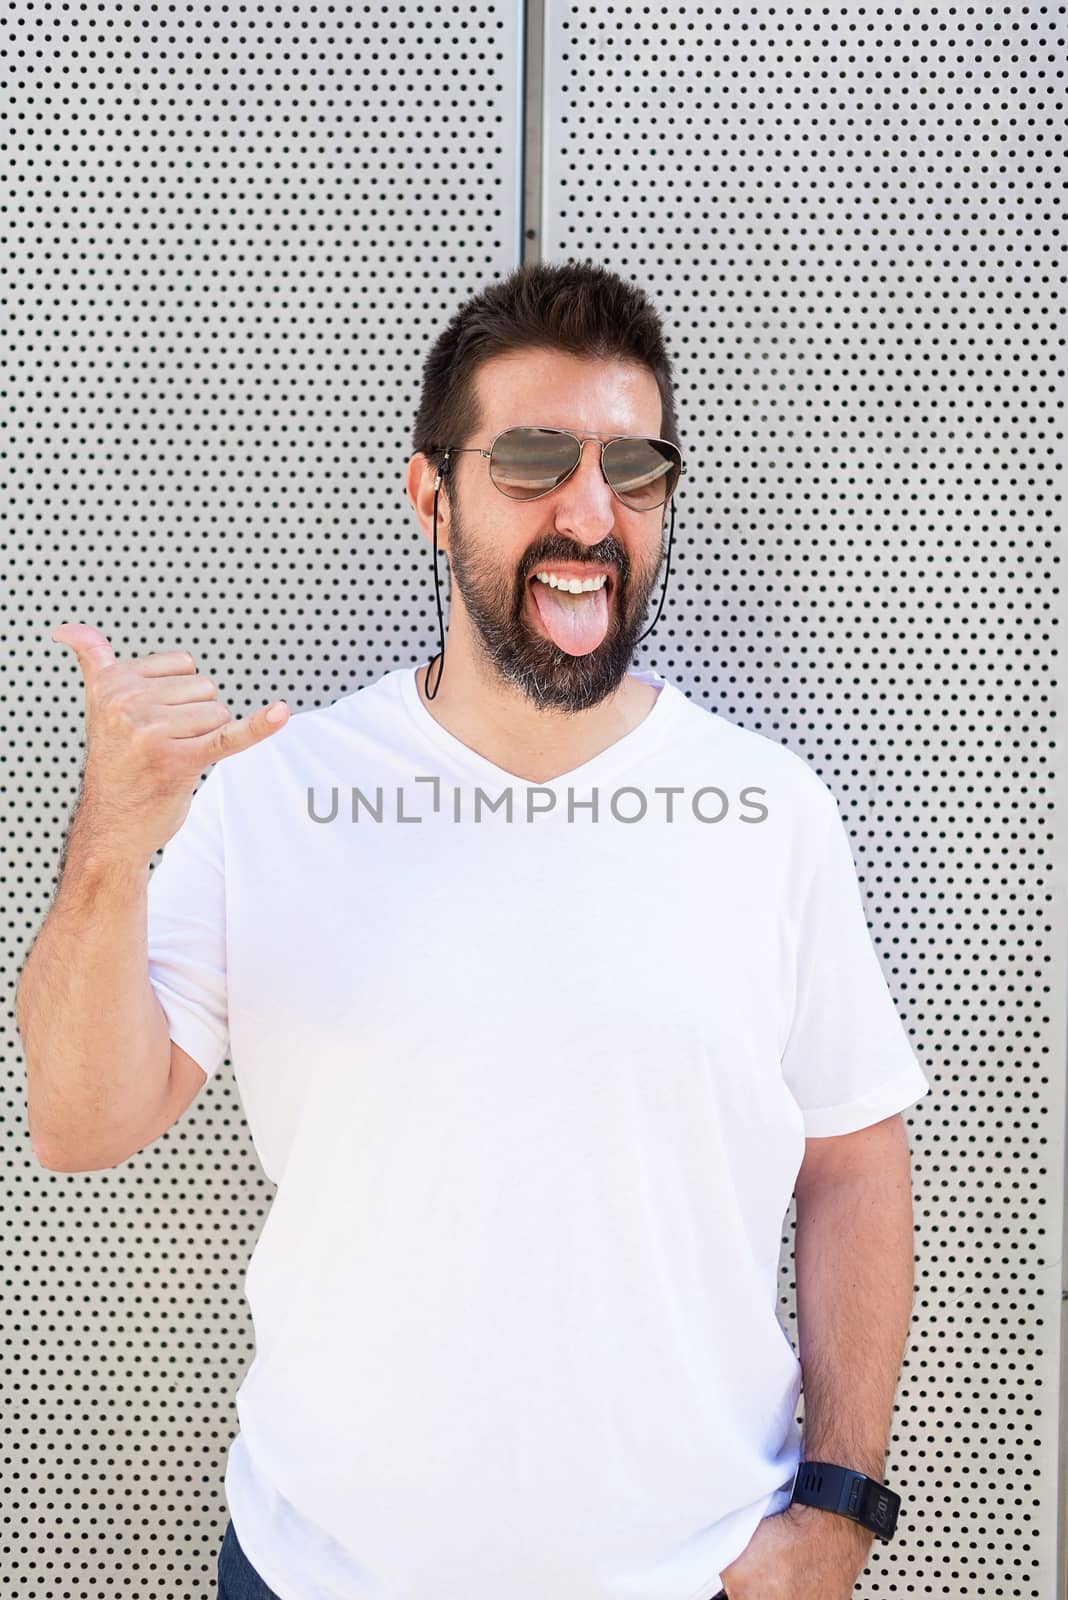 Bearded man with sunglasses gesturing while looking at camera